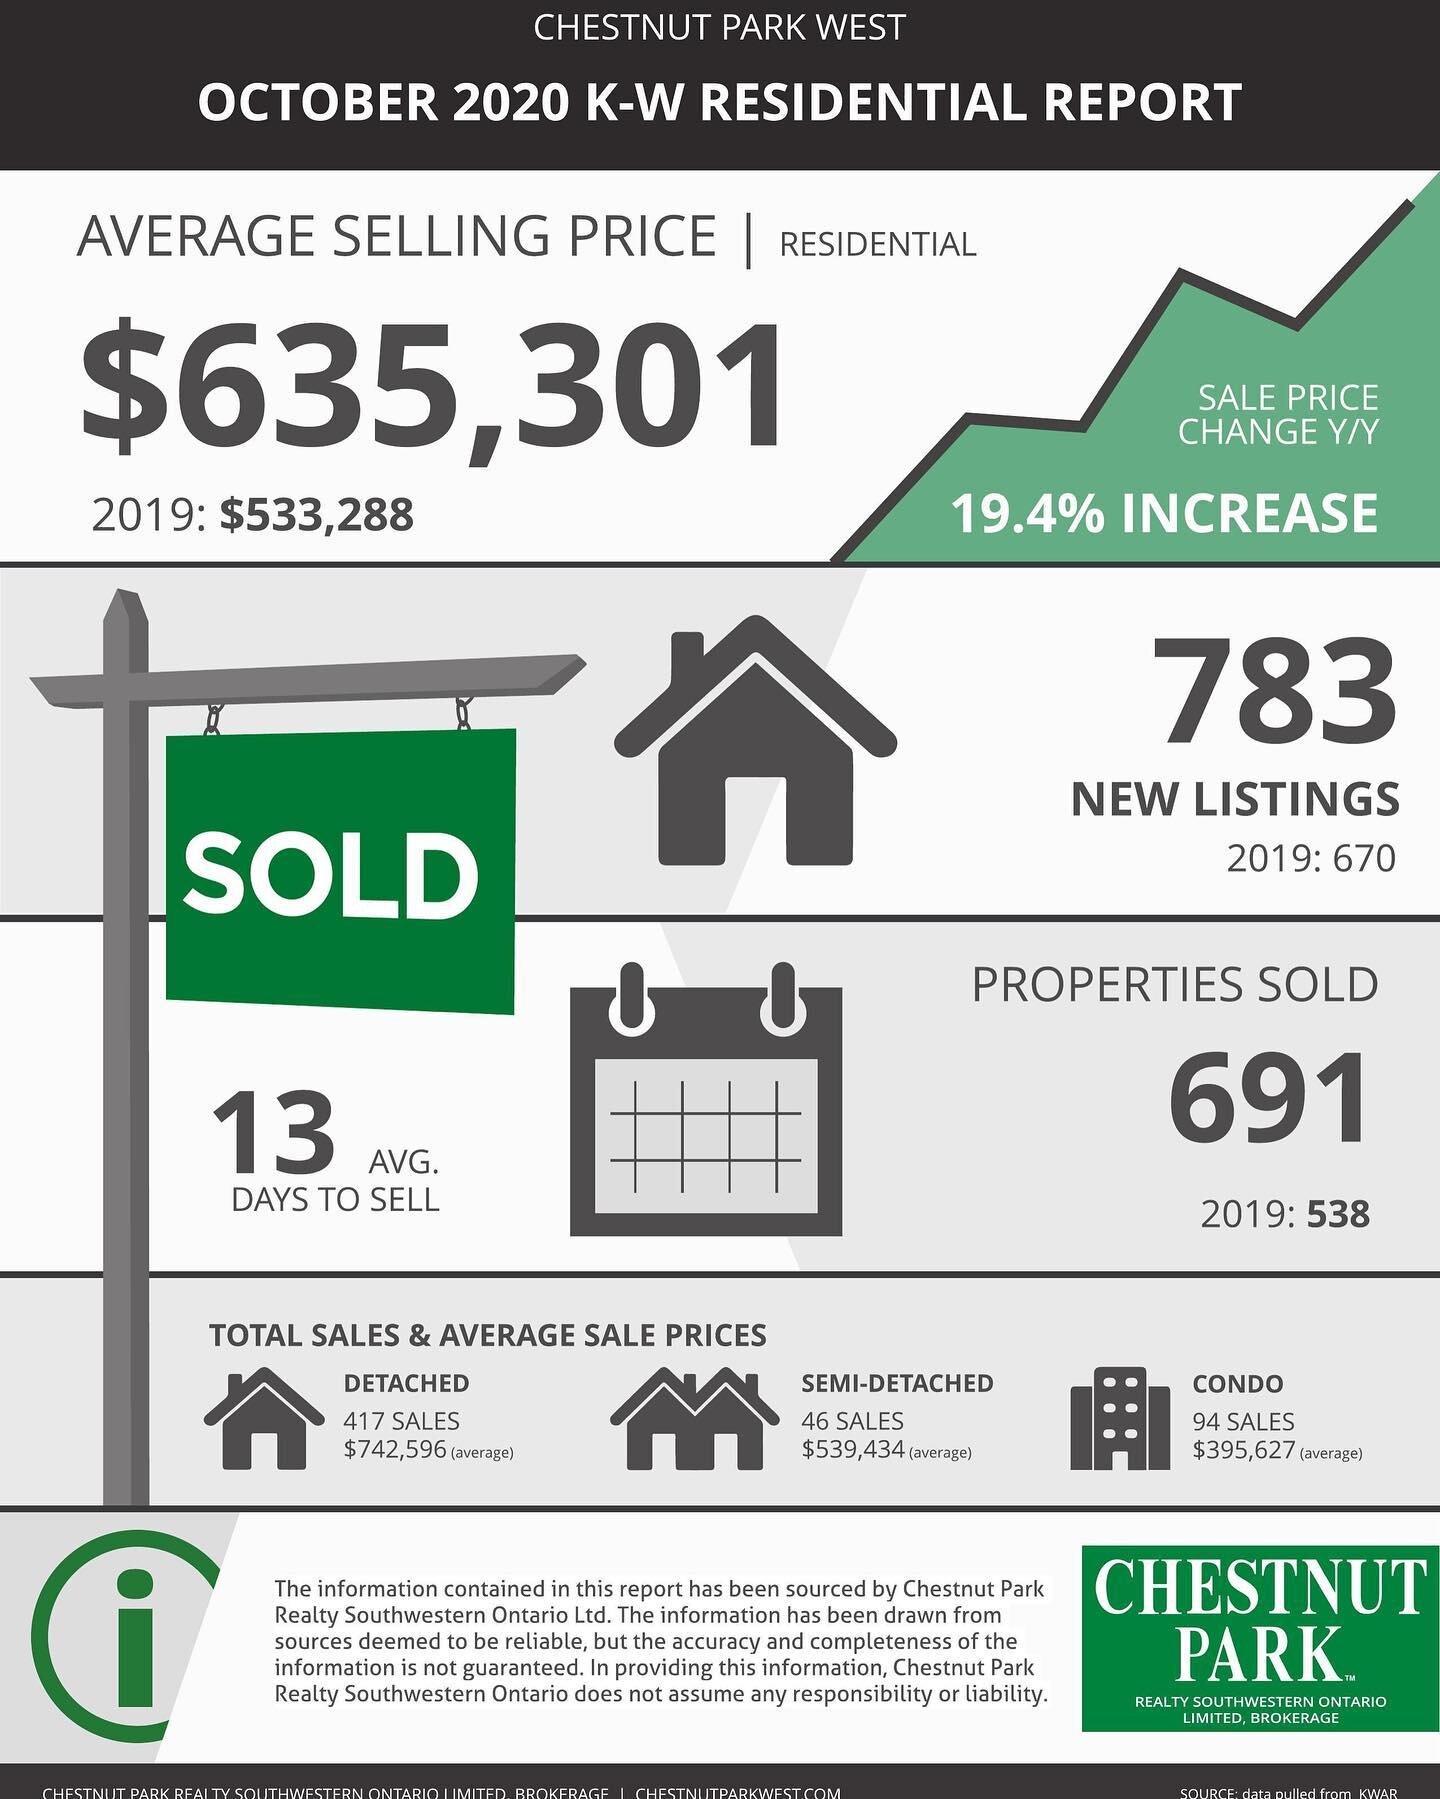 This is the 4th month in a row we have a monthly record of home sales. Consumers buying/selling real estate continues to be one of the few shining lights to help Ontario&rsquo;s economy recover from the pandemic. We&rsquo;re continuing to see more bu